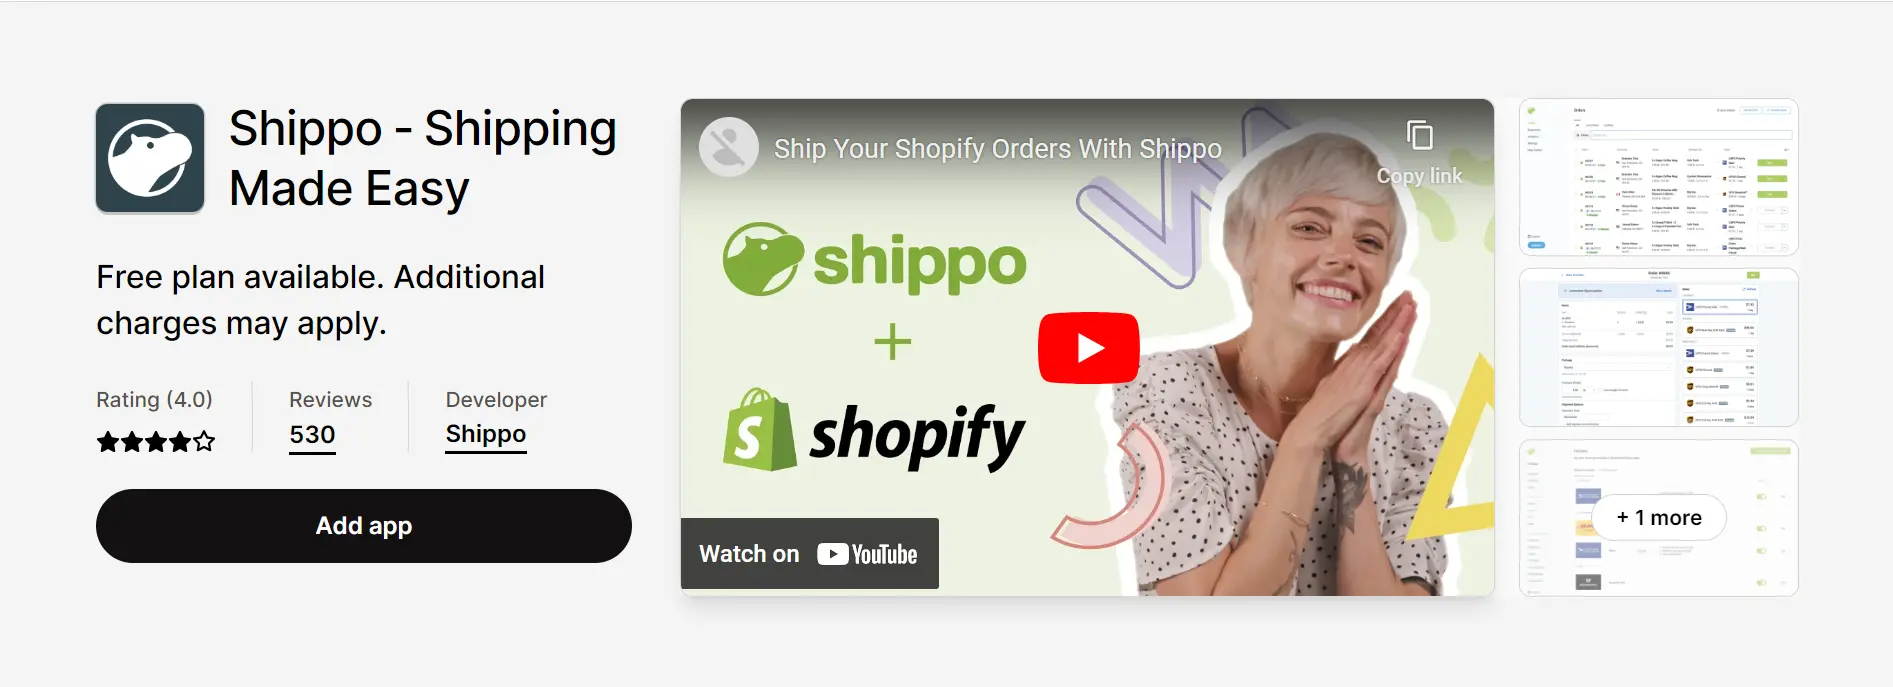 how to print shipping labels on shopify